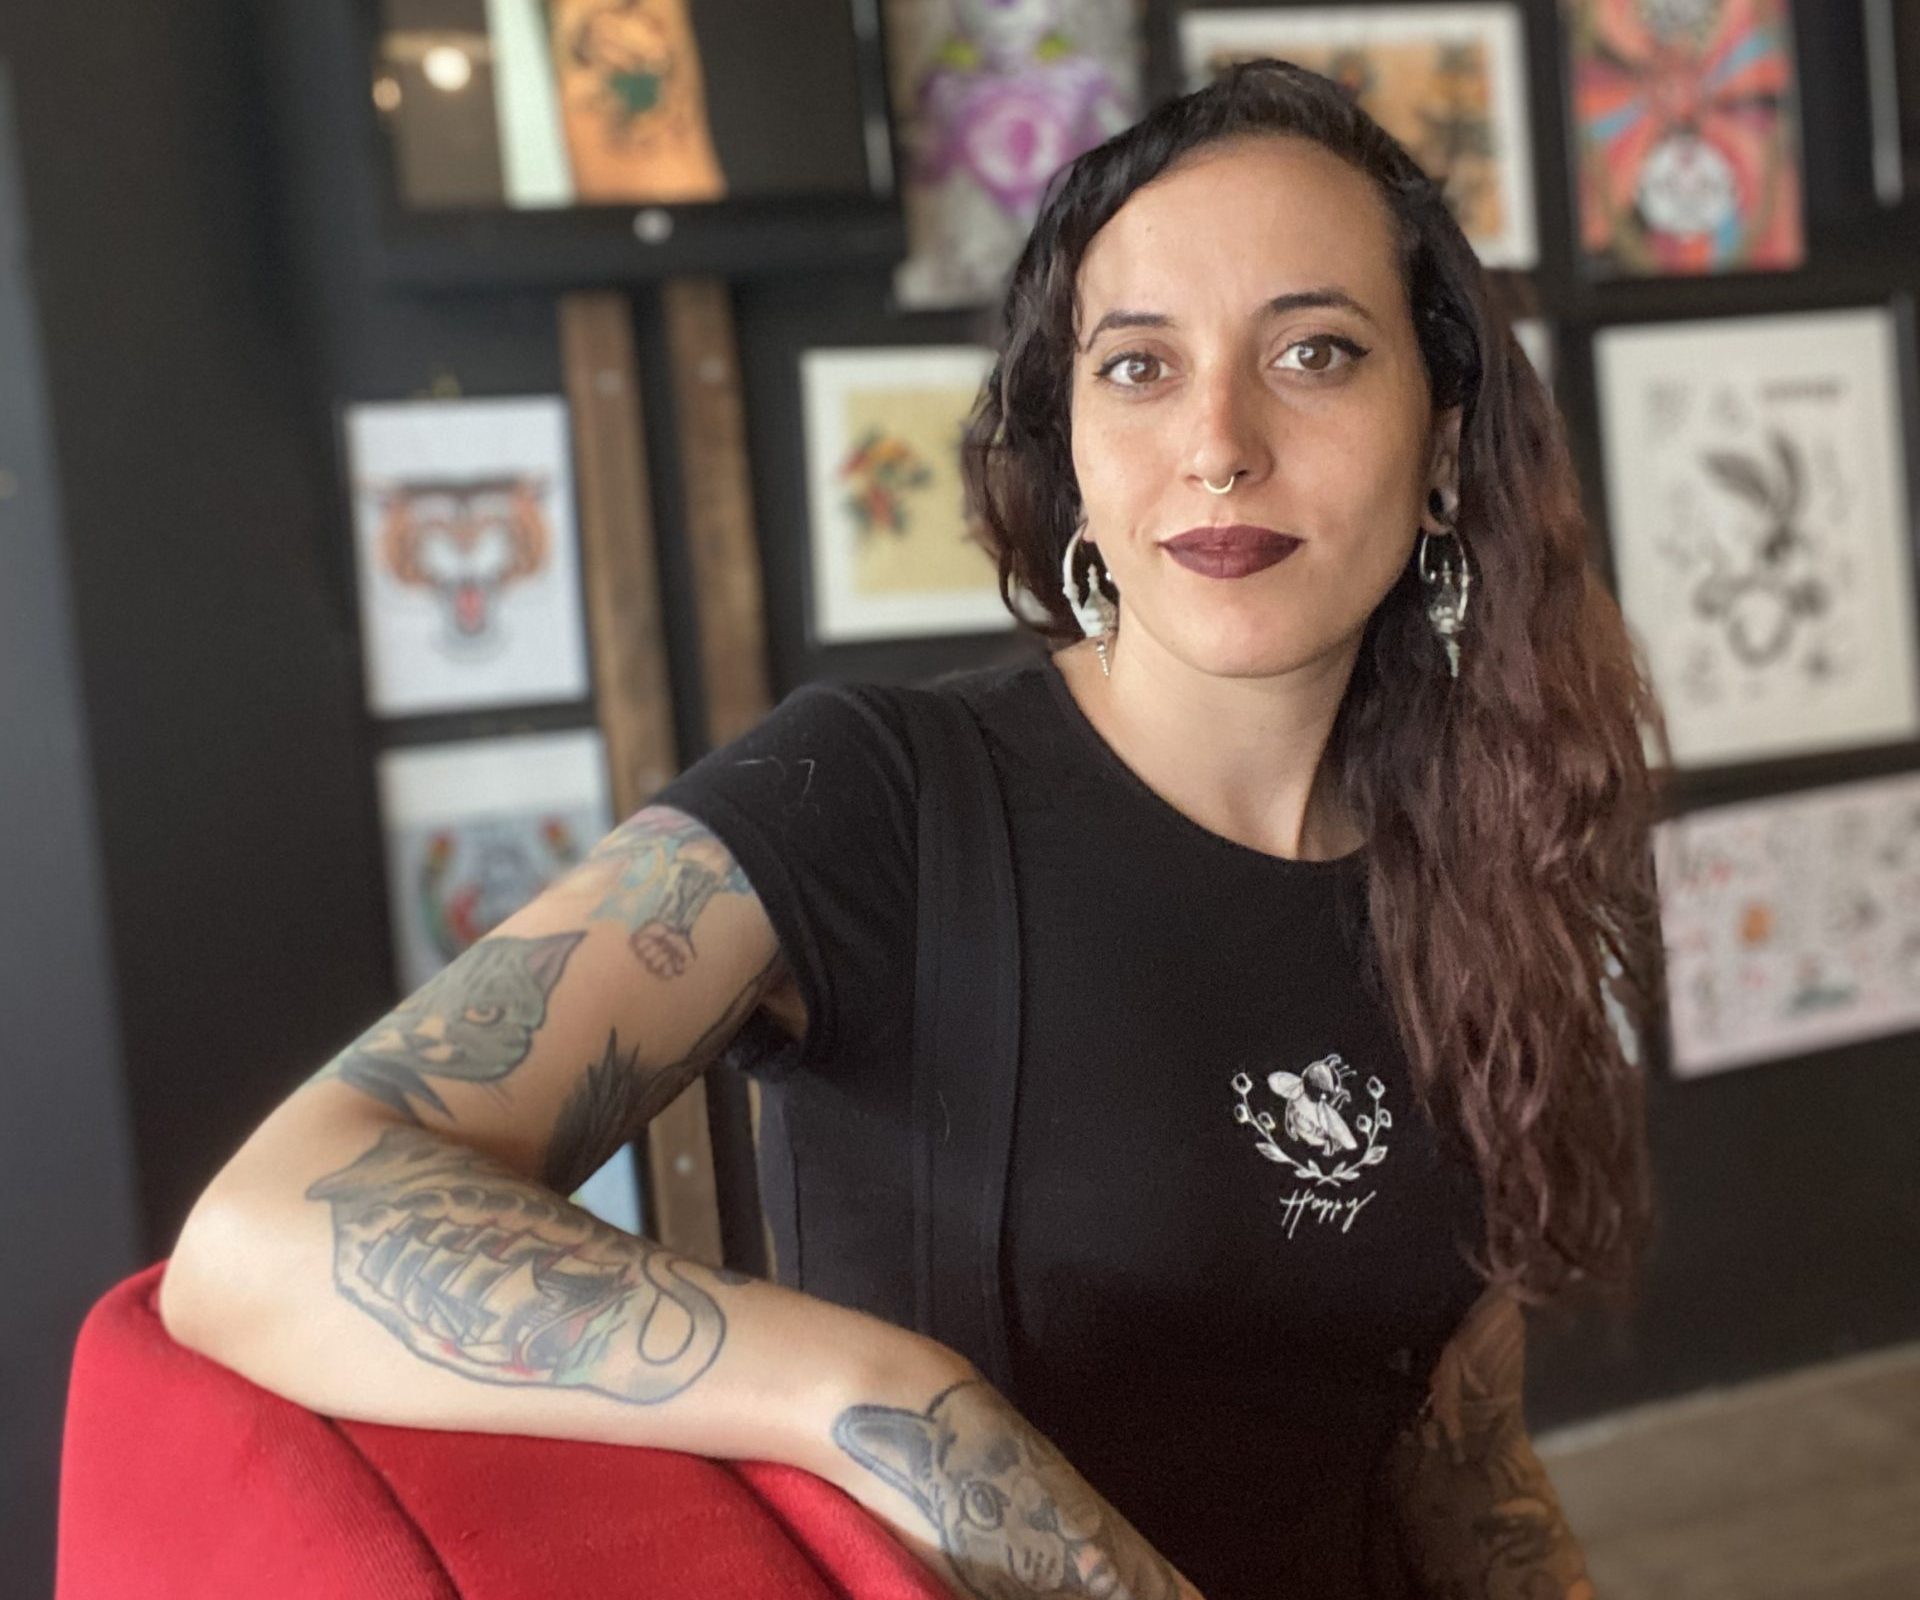 I preferred it when it was just freaks and outlaws”: Female tattoo fans  reveal their ink industry secrets - Mirror Online